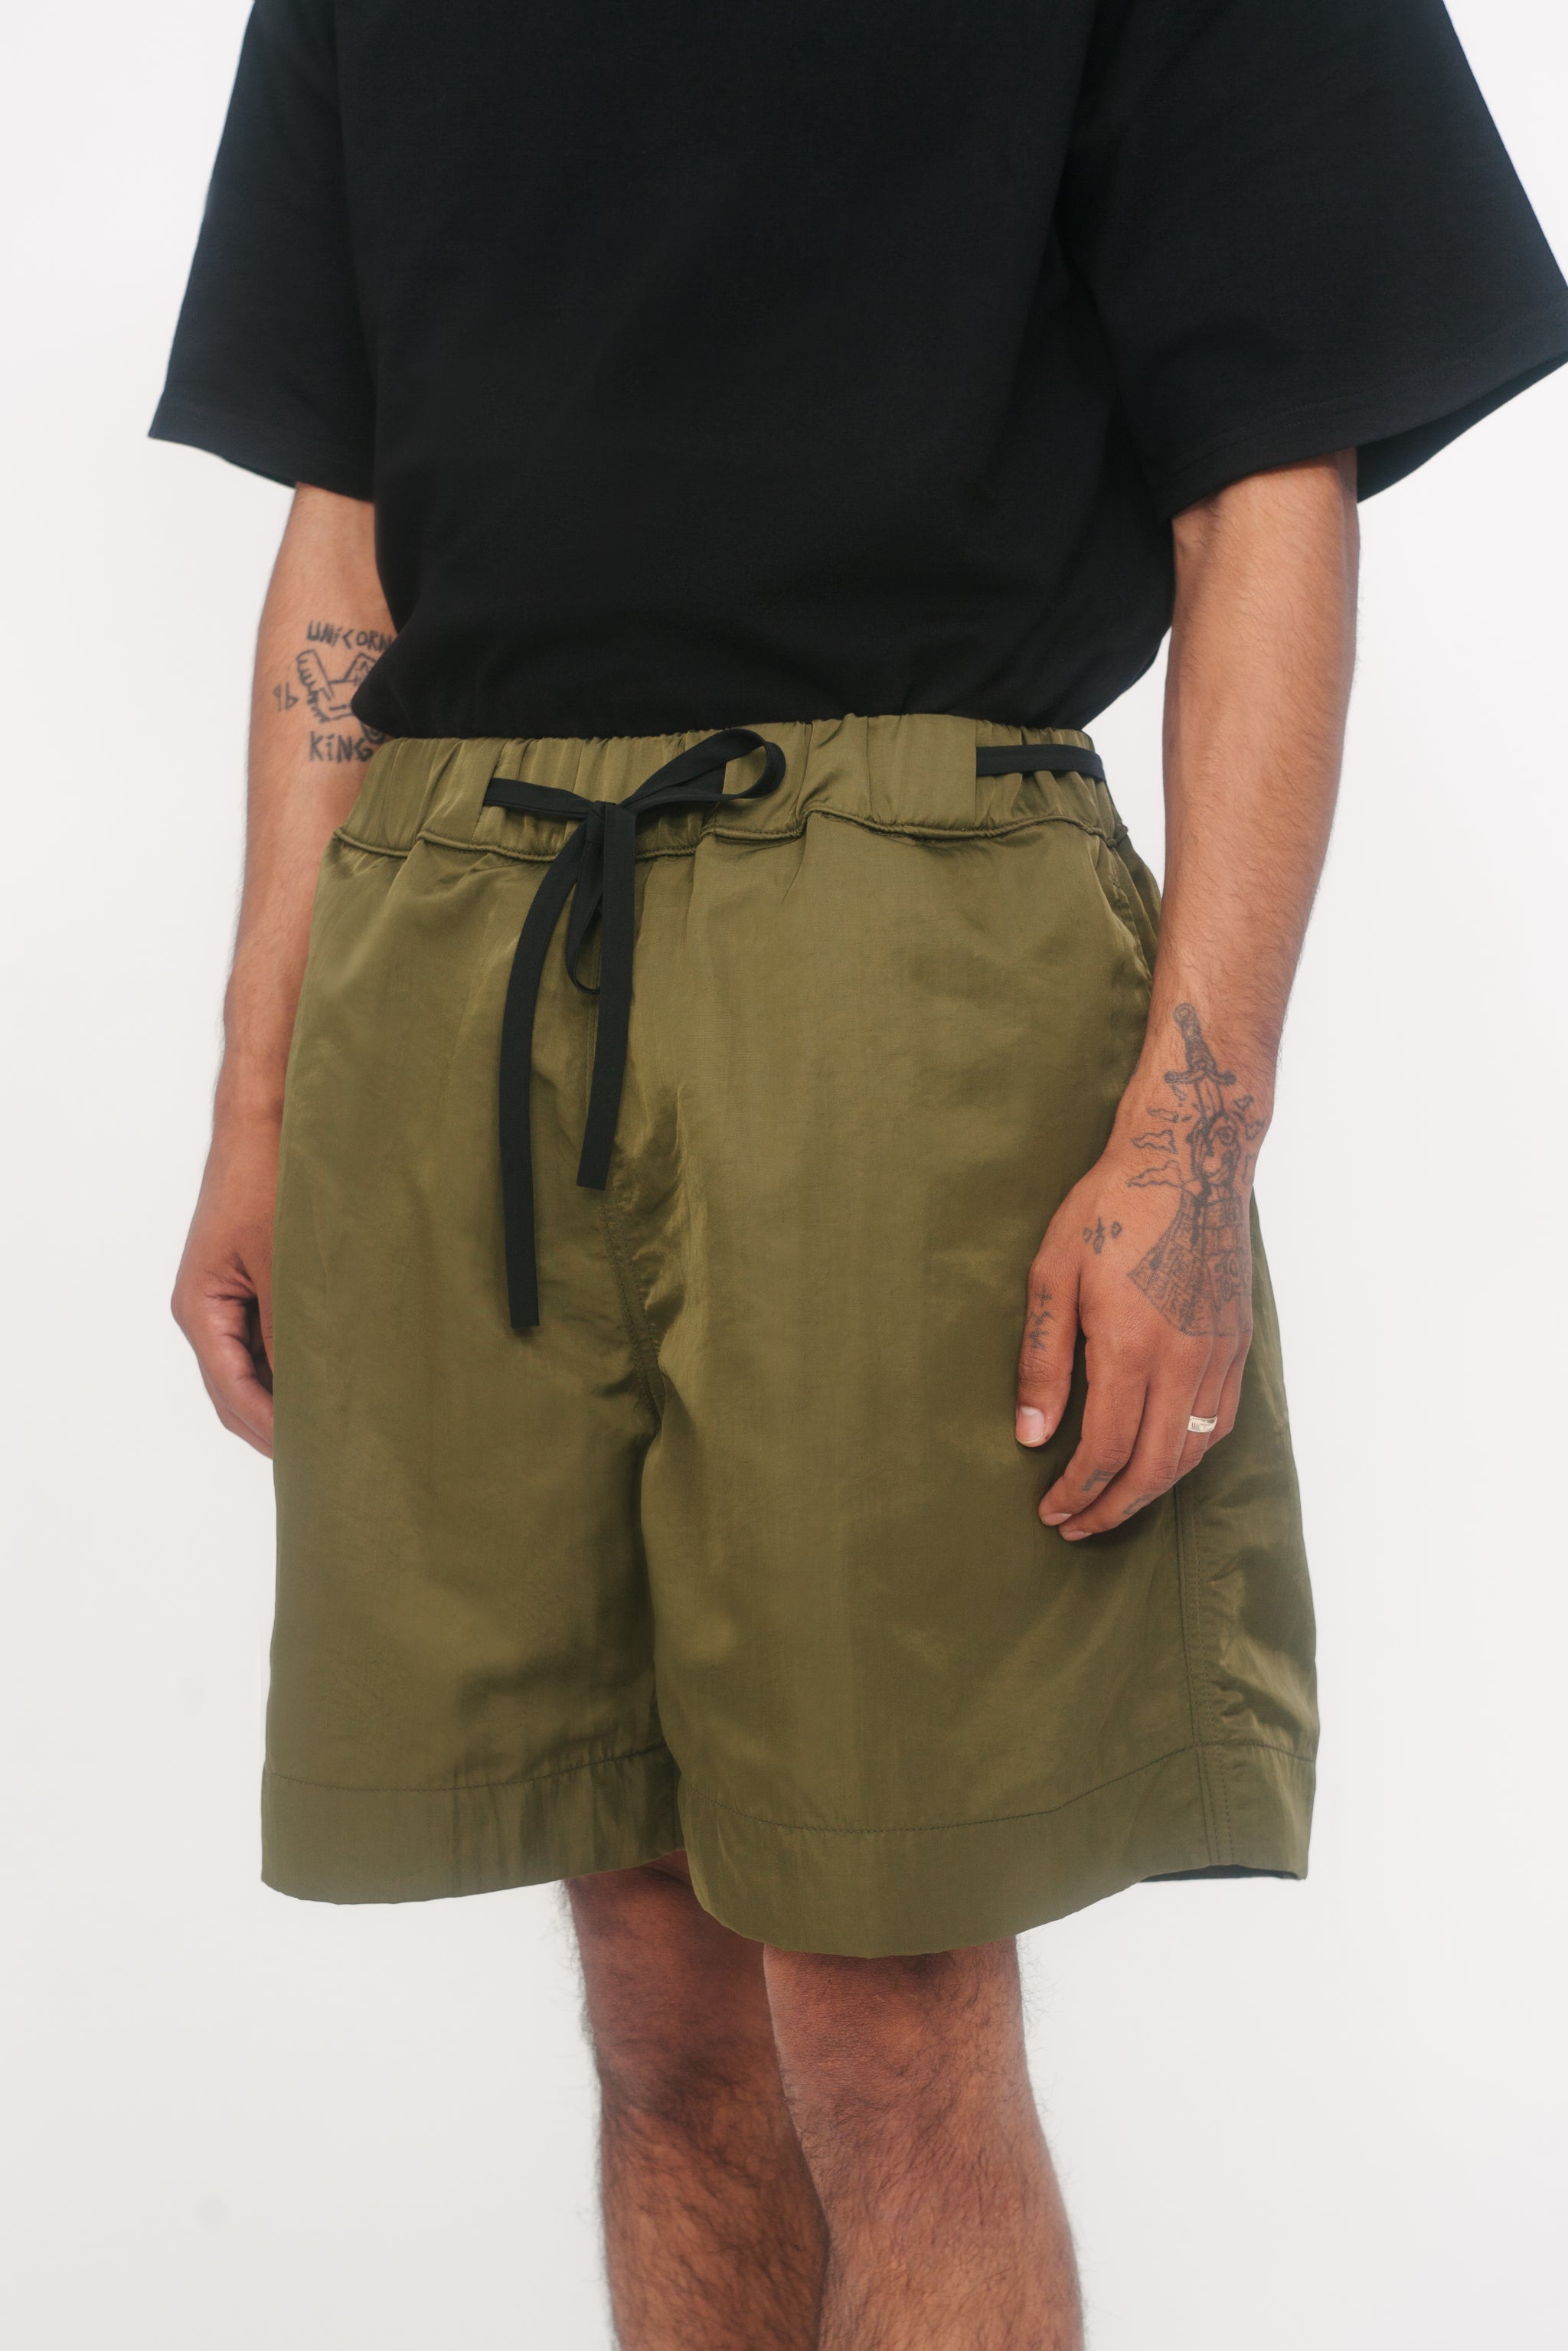 BOX SHORTS IN REFLECTIVE OLIVE